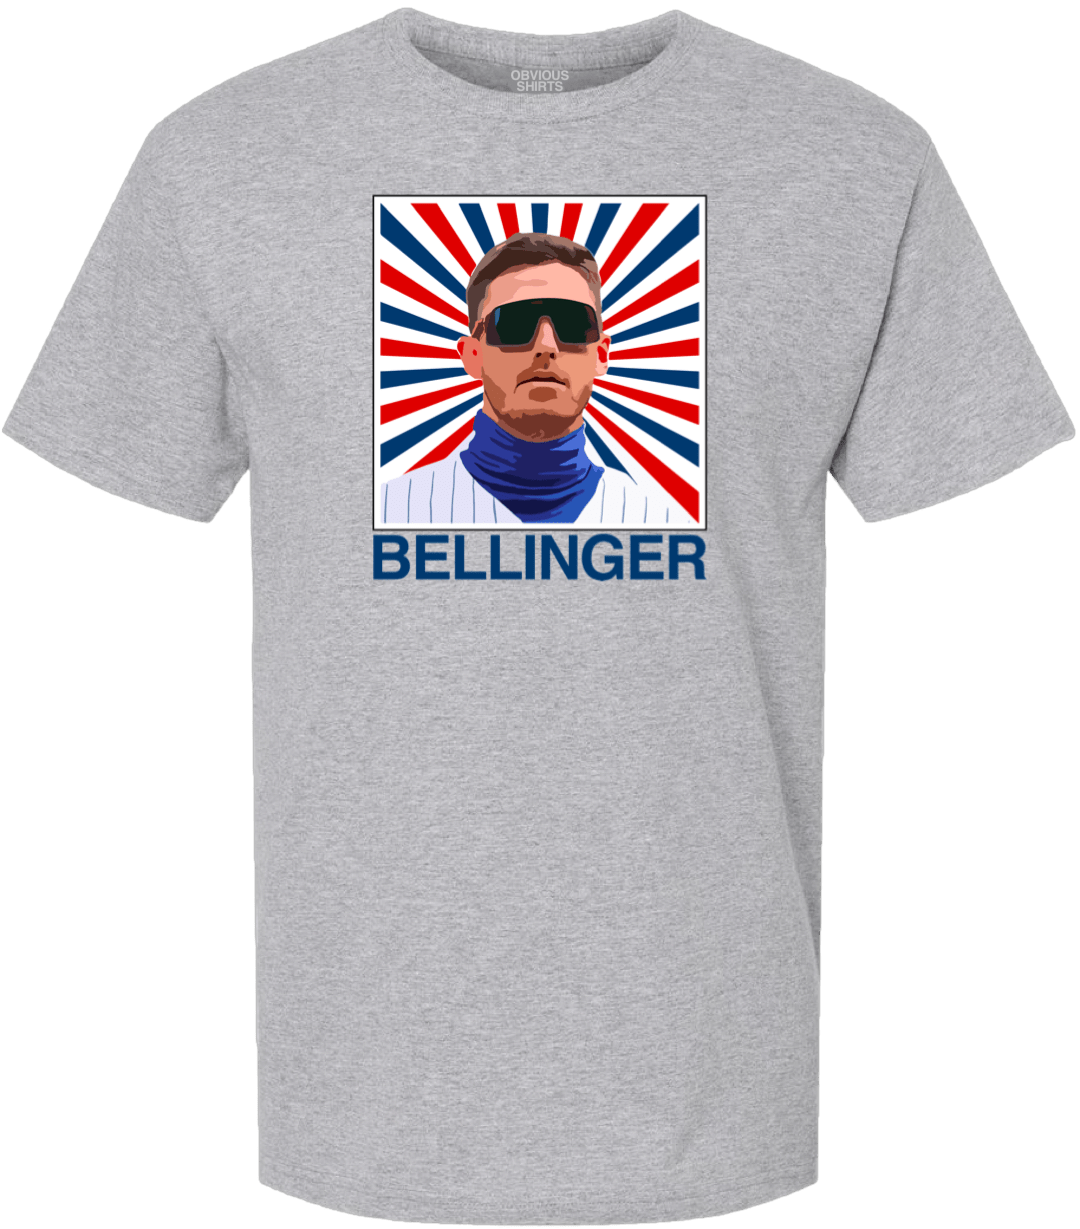 BELLINGER. - OBVIOUS SHIRTS